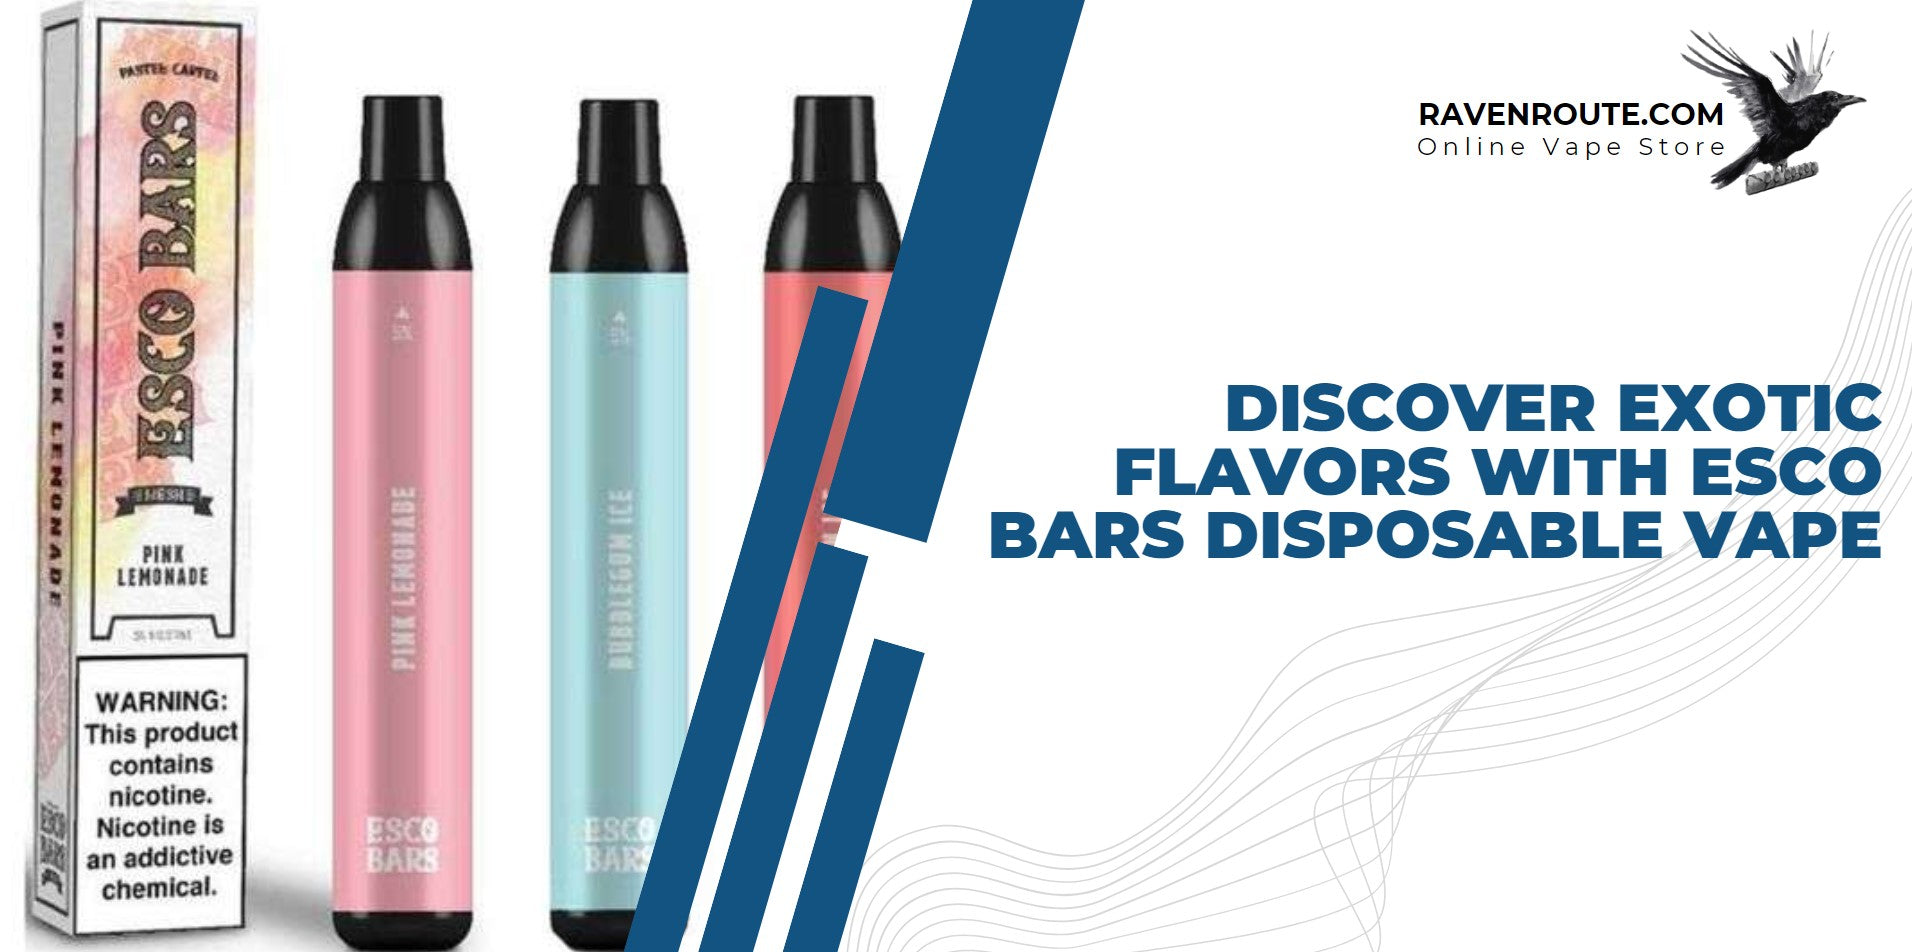 Discover Exotic Flavors with Esco Bars Disposable Vape